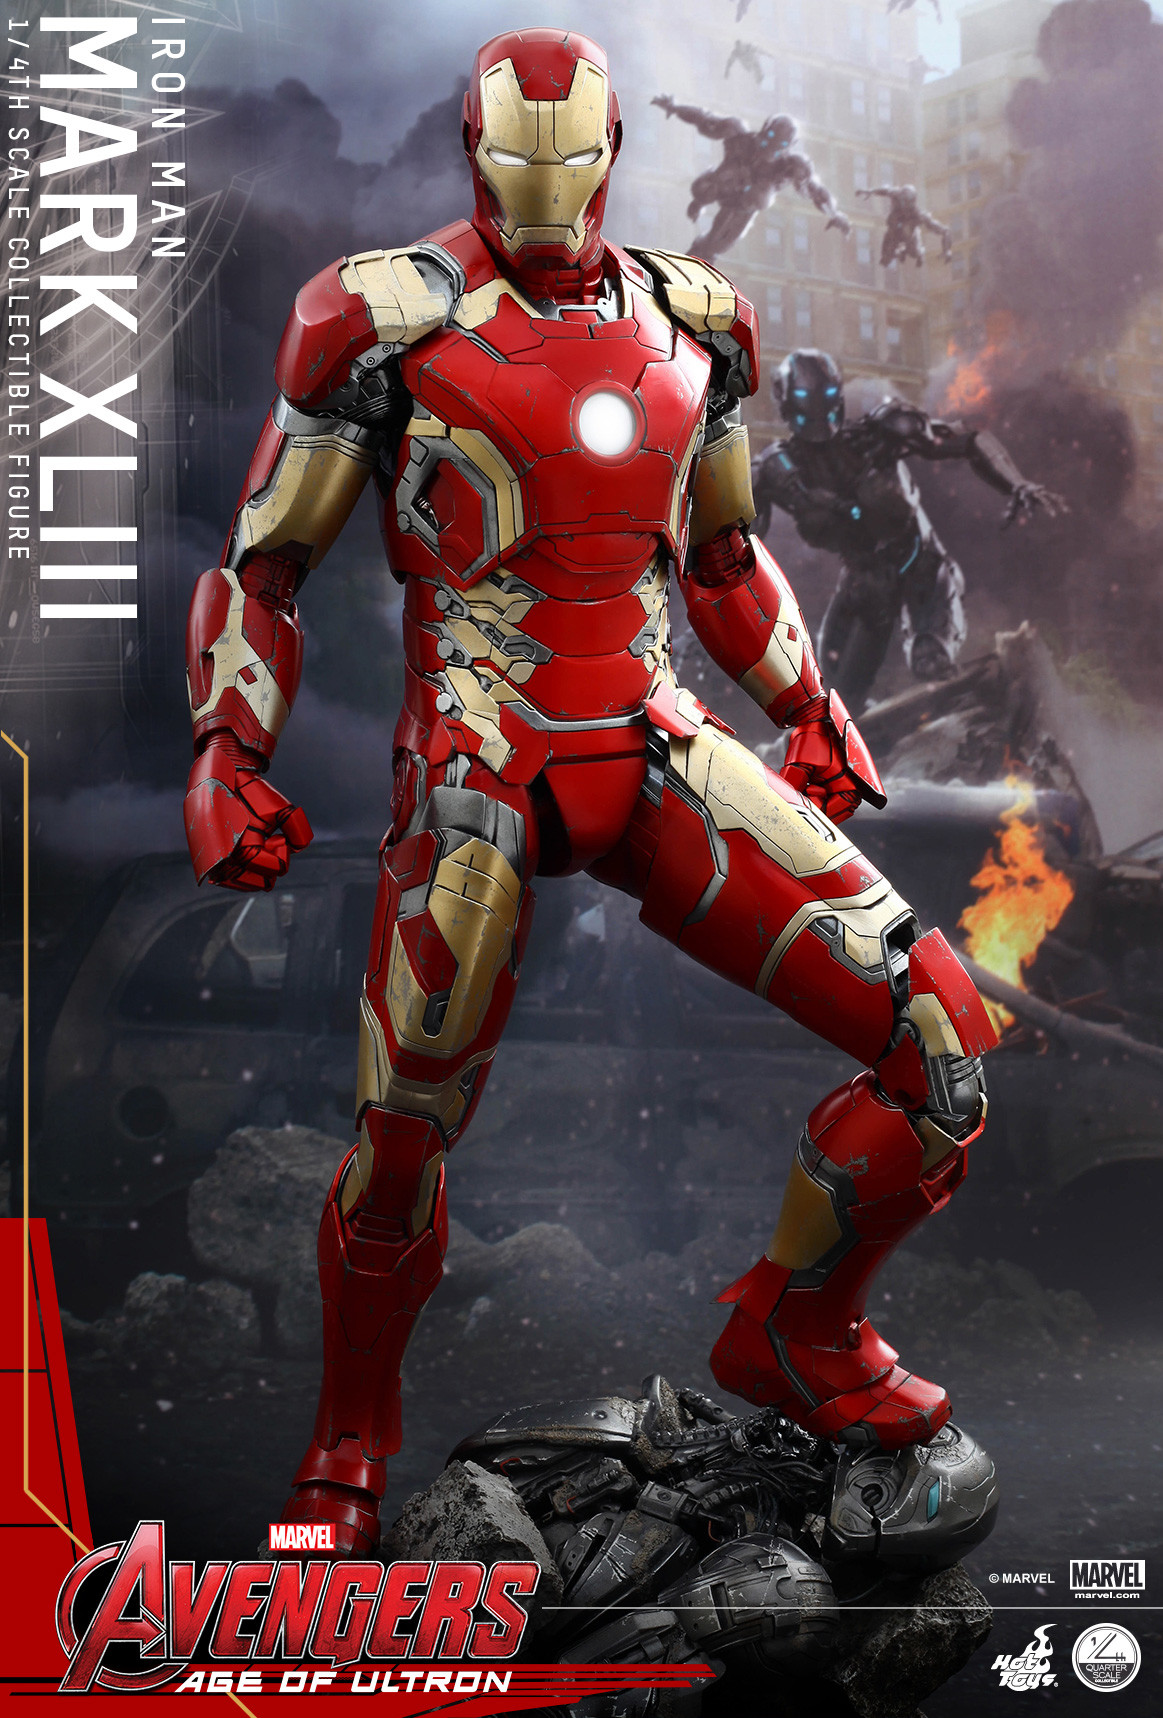 Hot Toys Iron Man Mark 20 20/20 Scale Figure Up for Order   Marvel ...